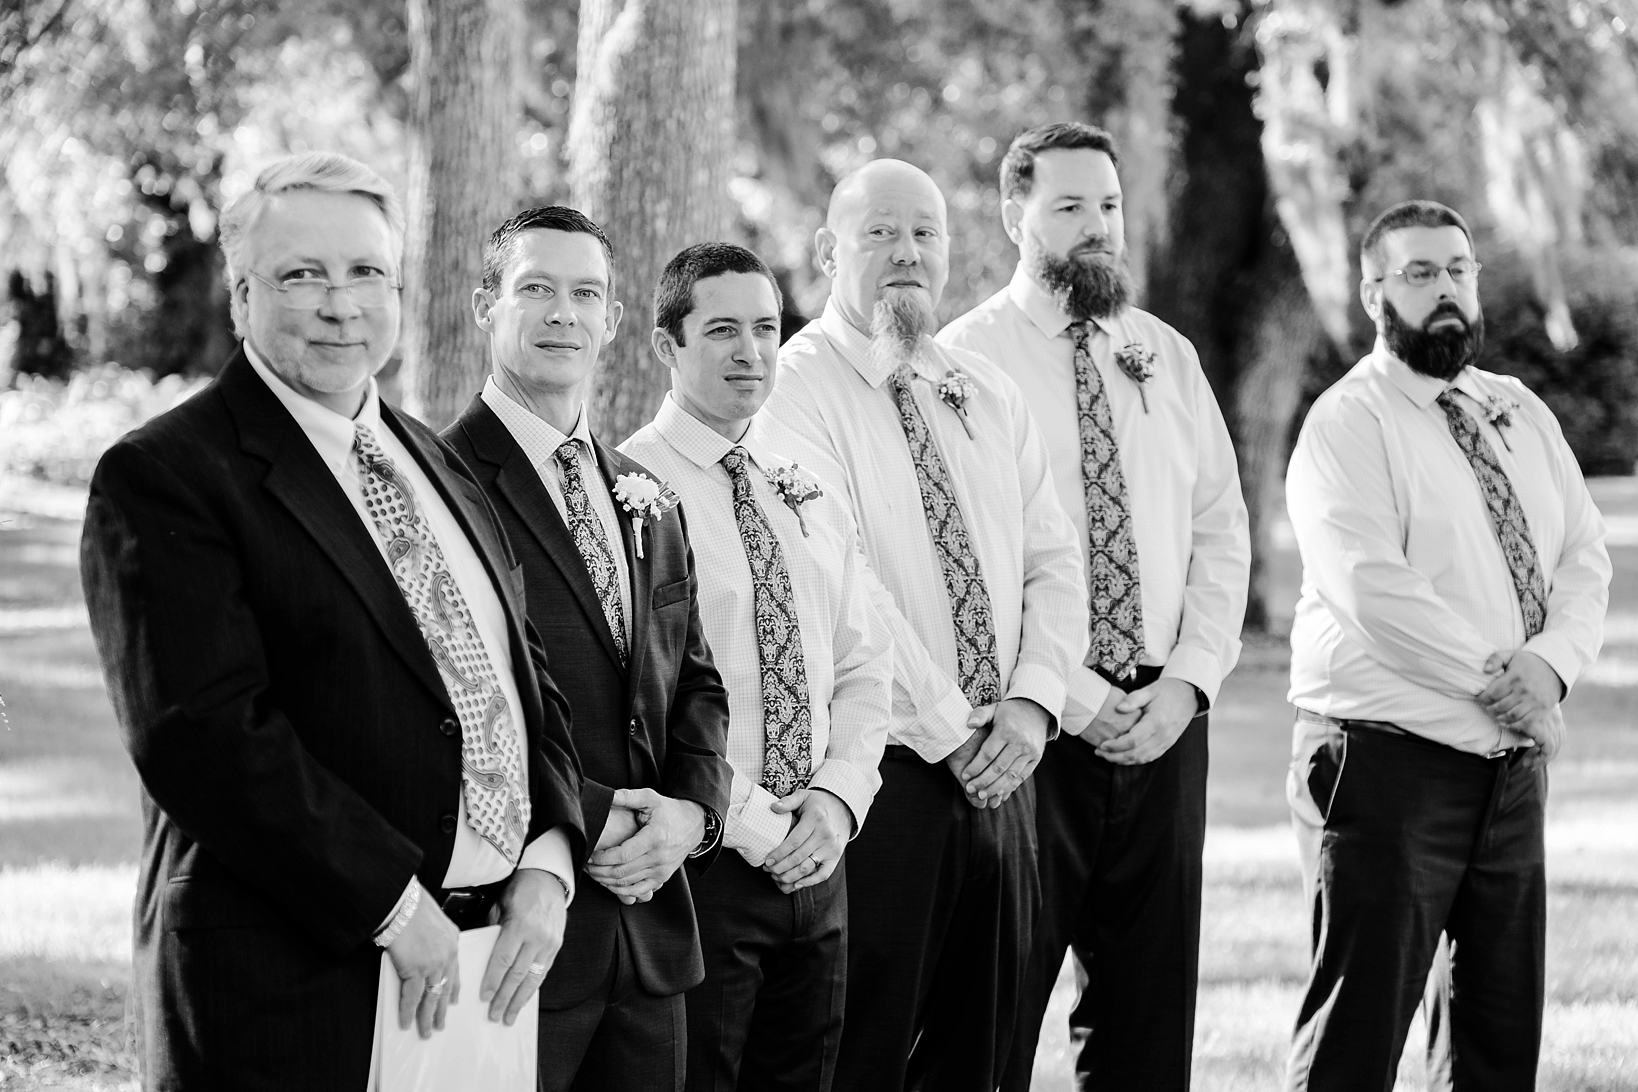 The groom and his groomsmen wait for the Bride to arrive to the wedding ceremony